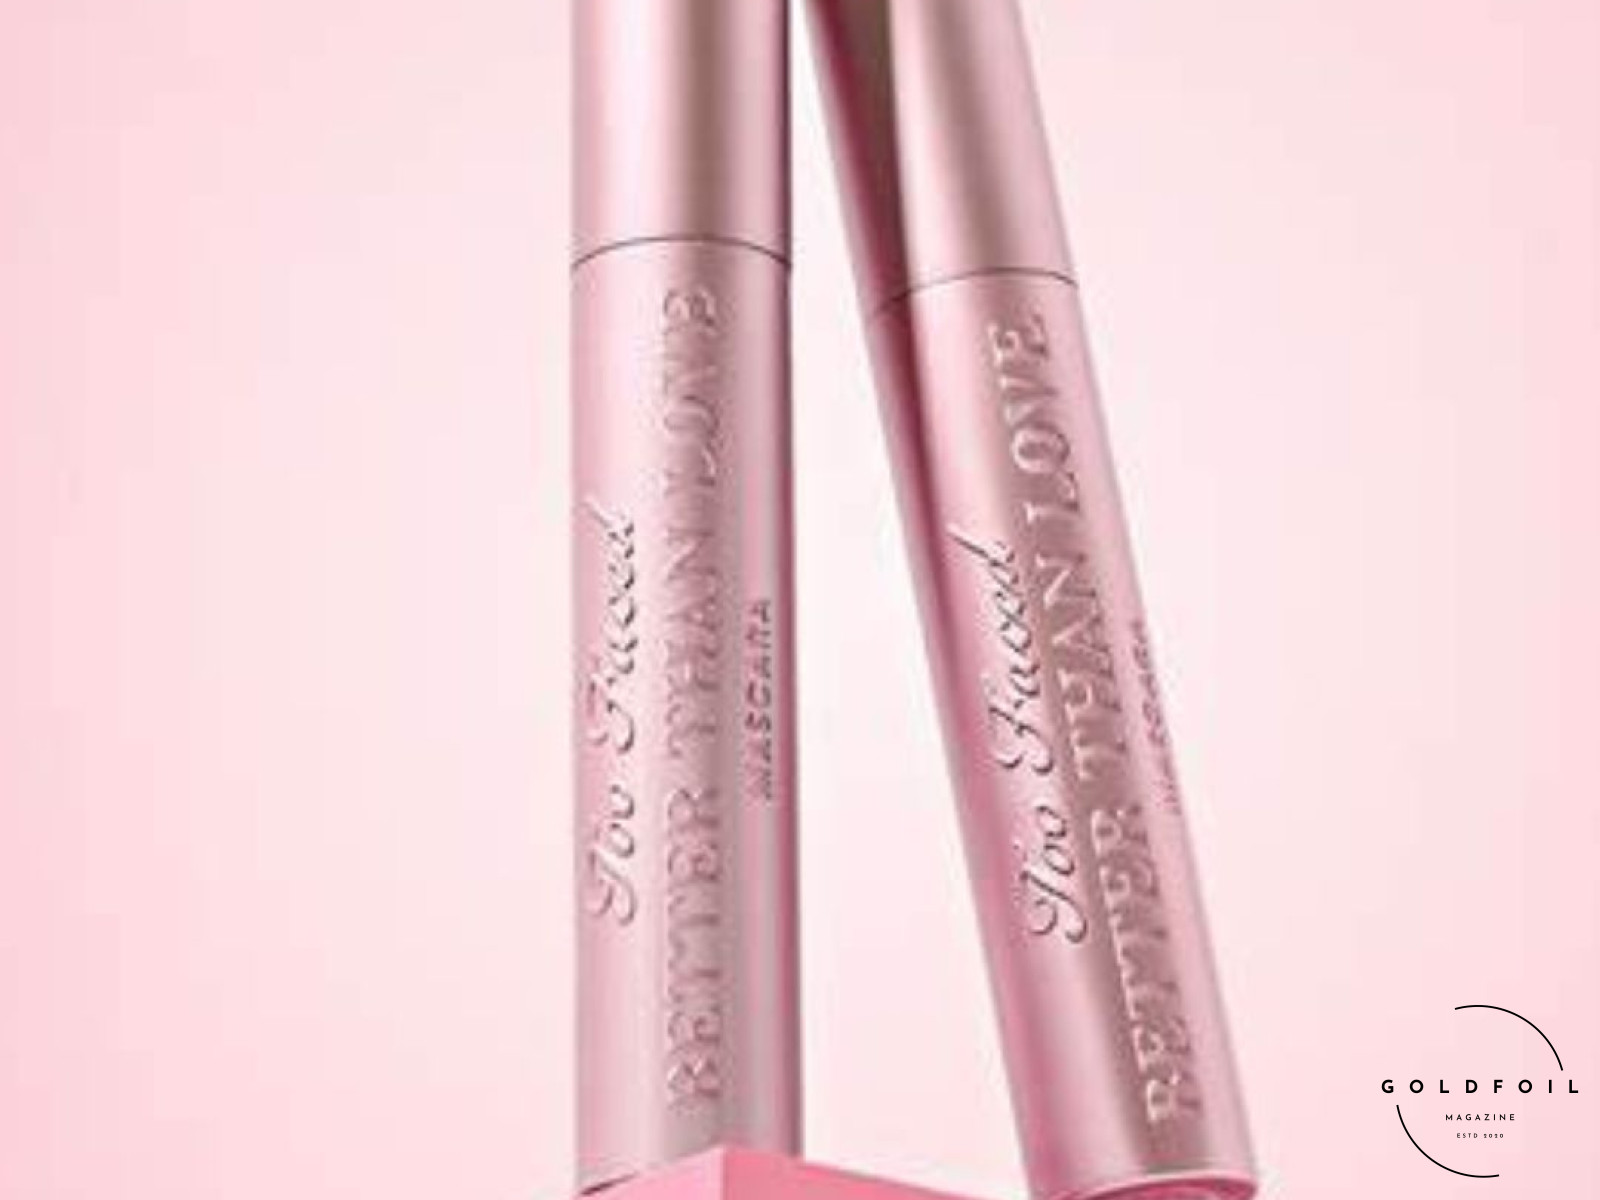 Too Faced Mascara for thick eyelashes is one of the best and most sold mascaras in the US